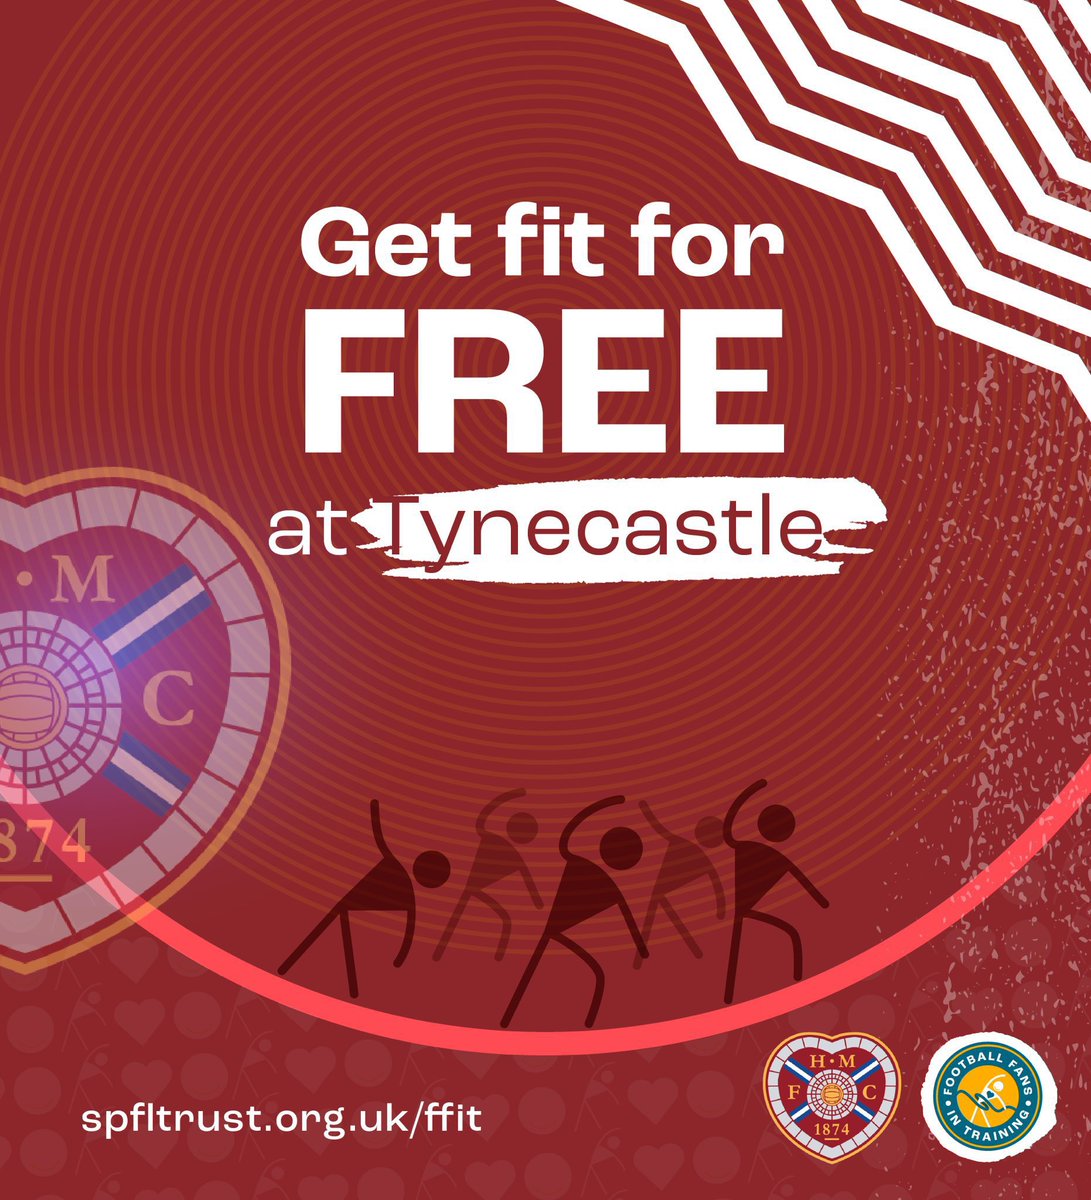 Our next Female Football Fans in Training group with the @SPFLTrust starts in May 2024! #FFIT   Are you wanting to: 🧠Feel better about yourself 🏃🏻Become more active 😅Lose weight 🥗Develop a healthier lifestyle 💪🏼Get fitter Register your interest here 👇 bit.ly/FFIT2024HMFC